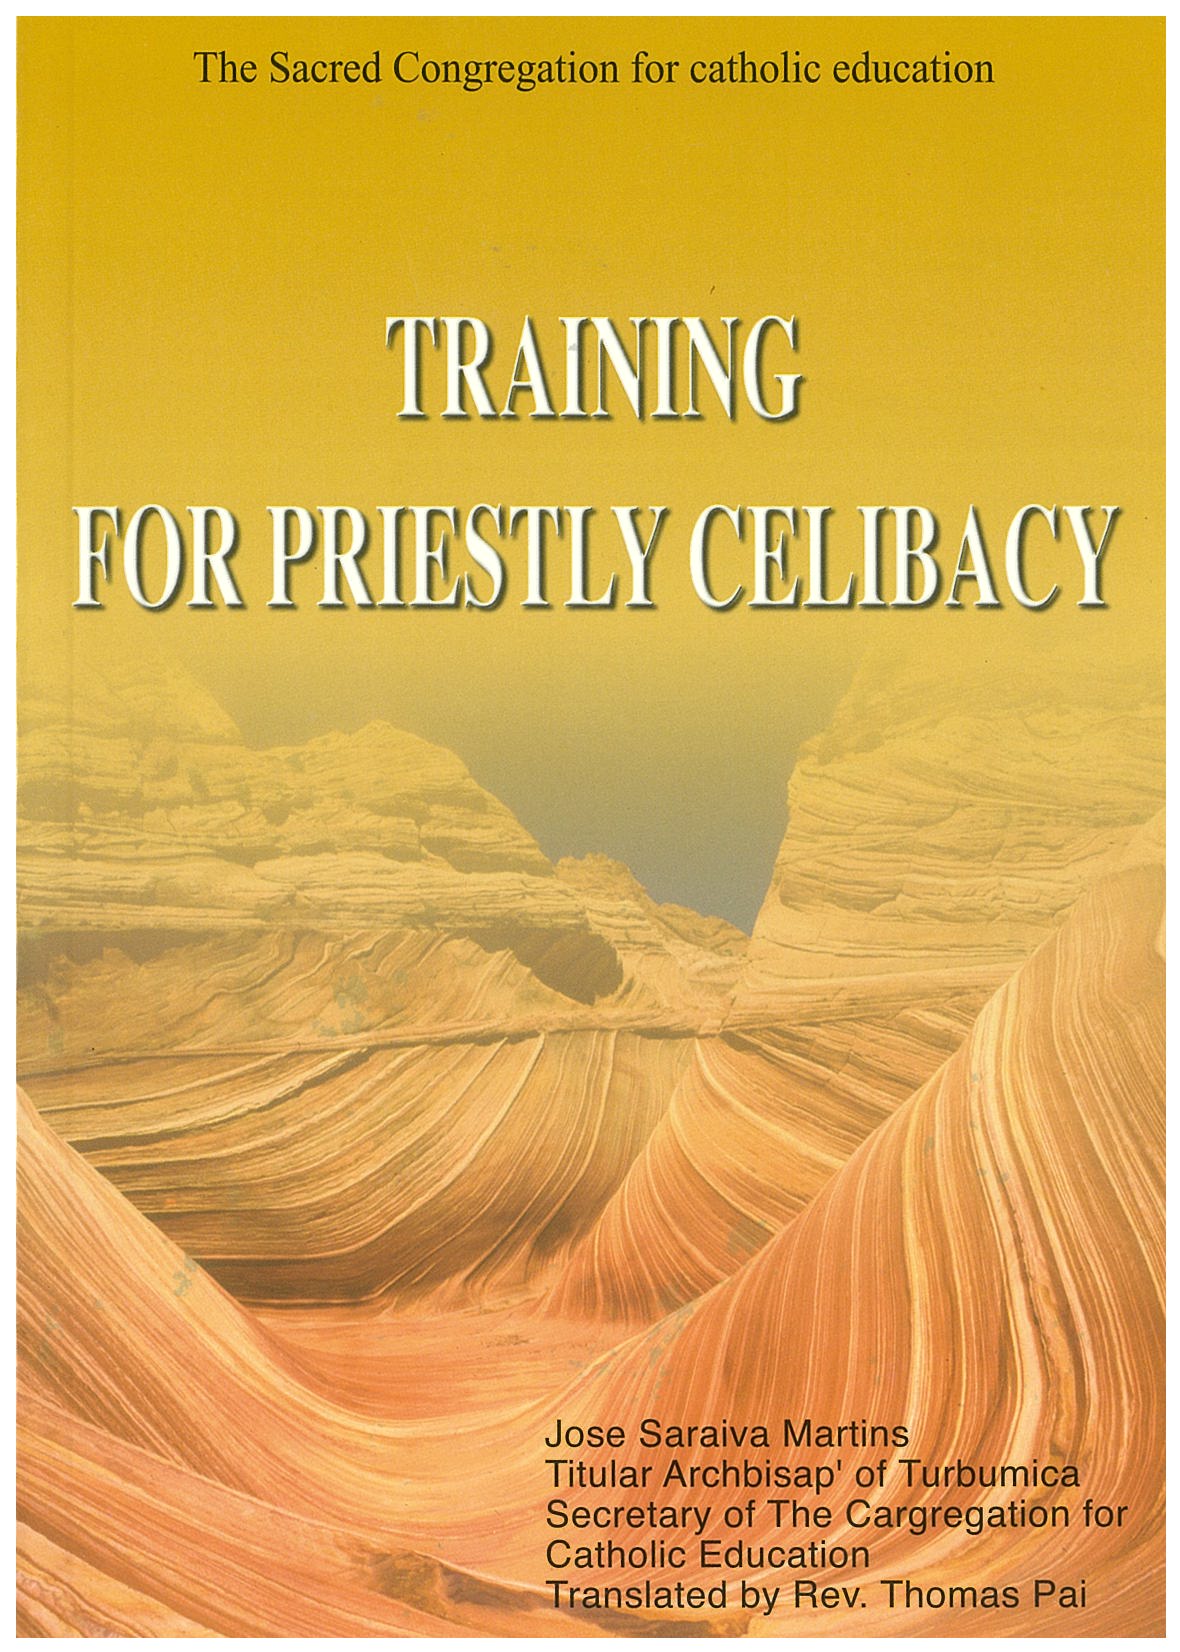 Training for priestly celibacy